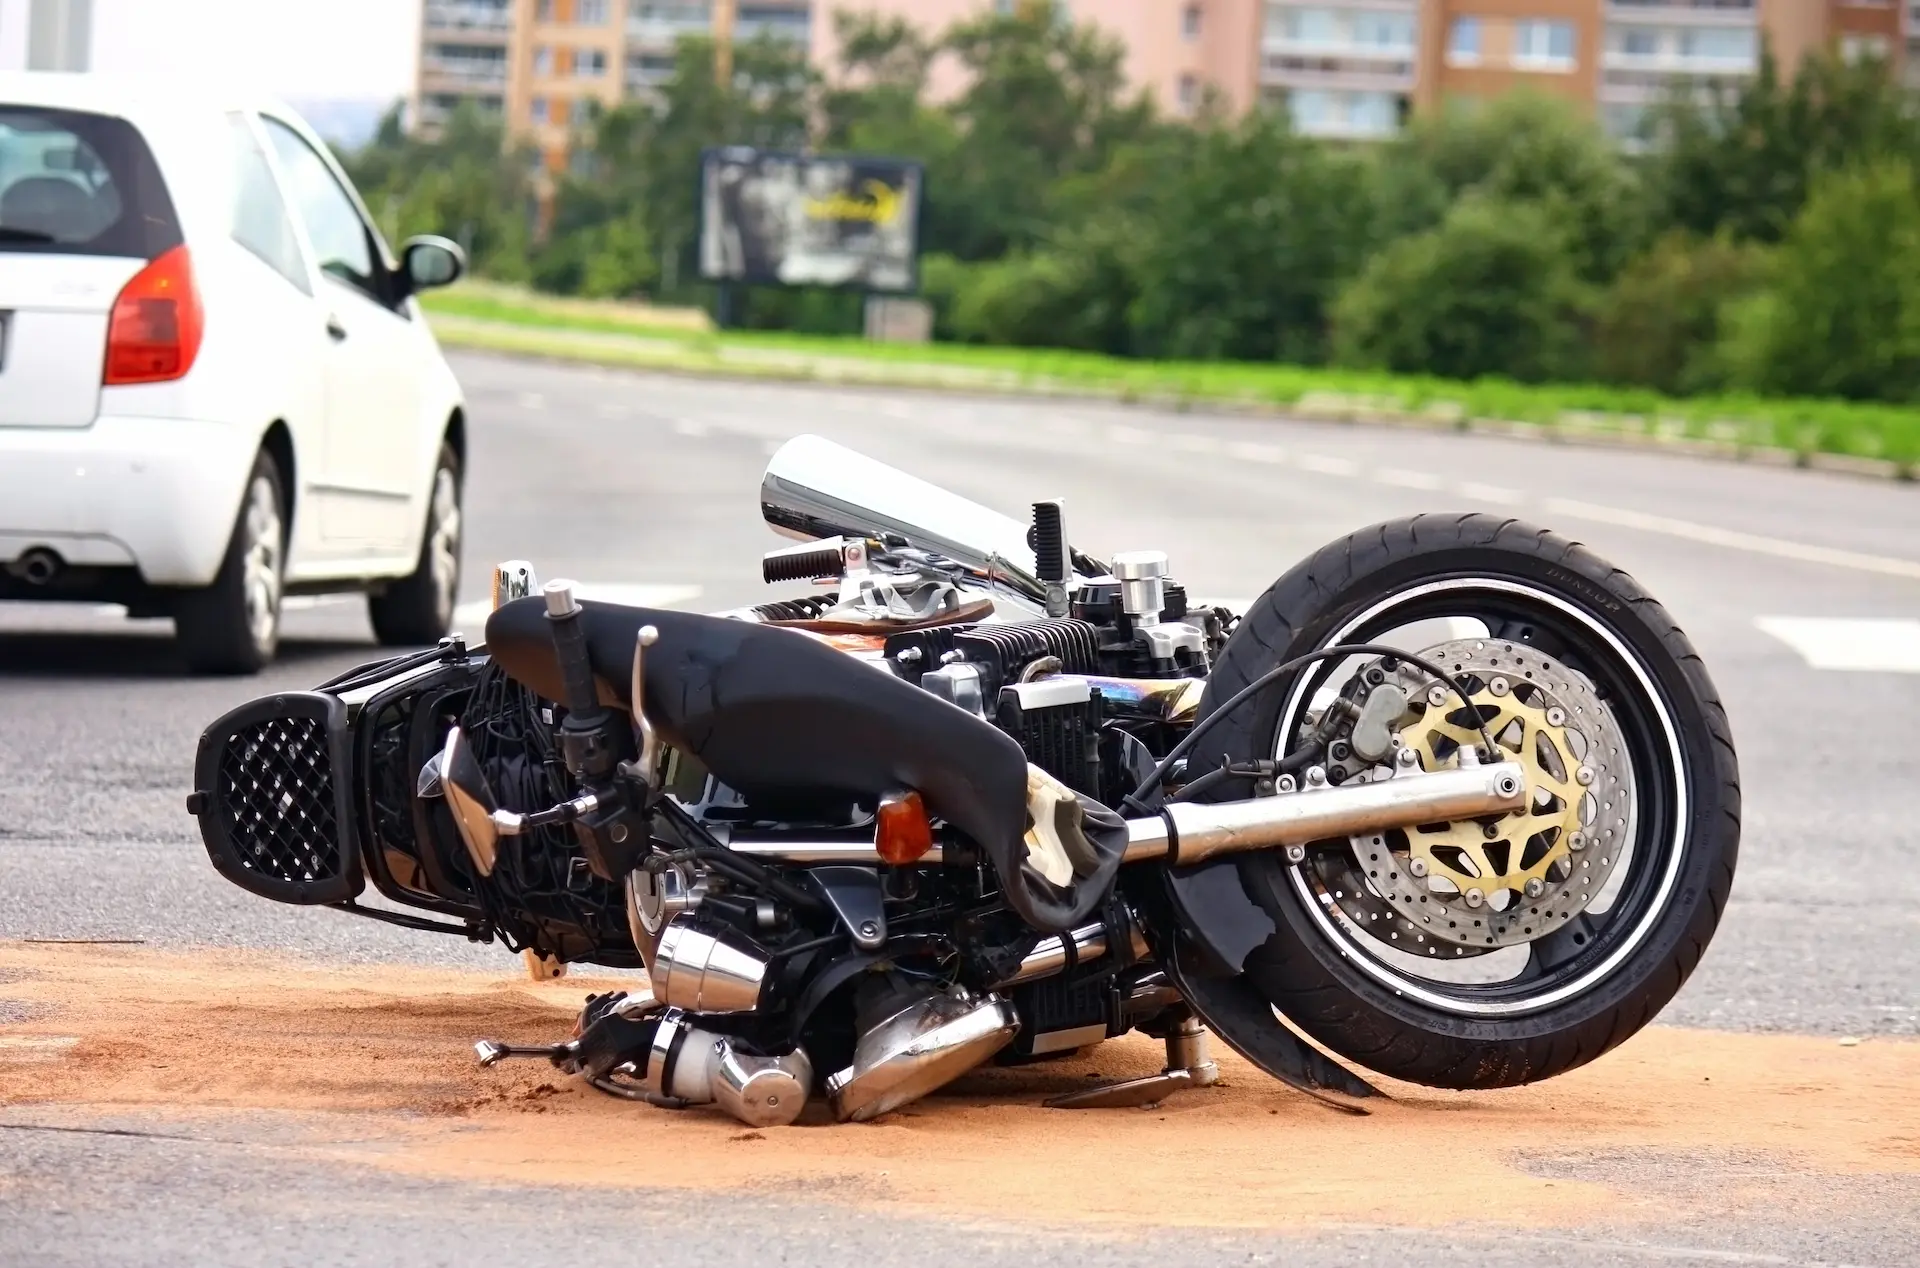 motorcycle accident lawyer in houston, texas